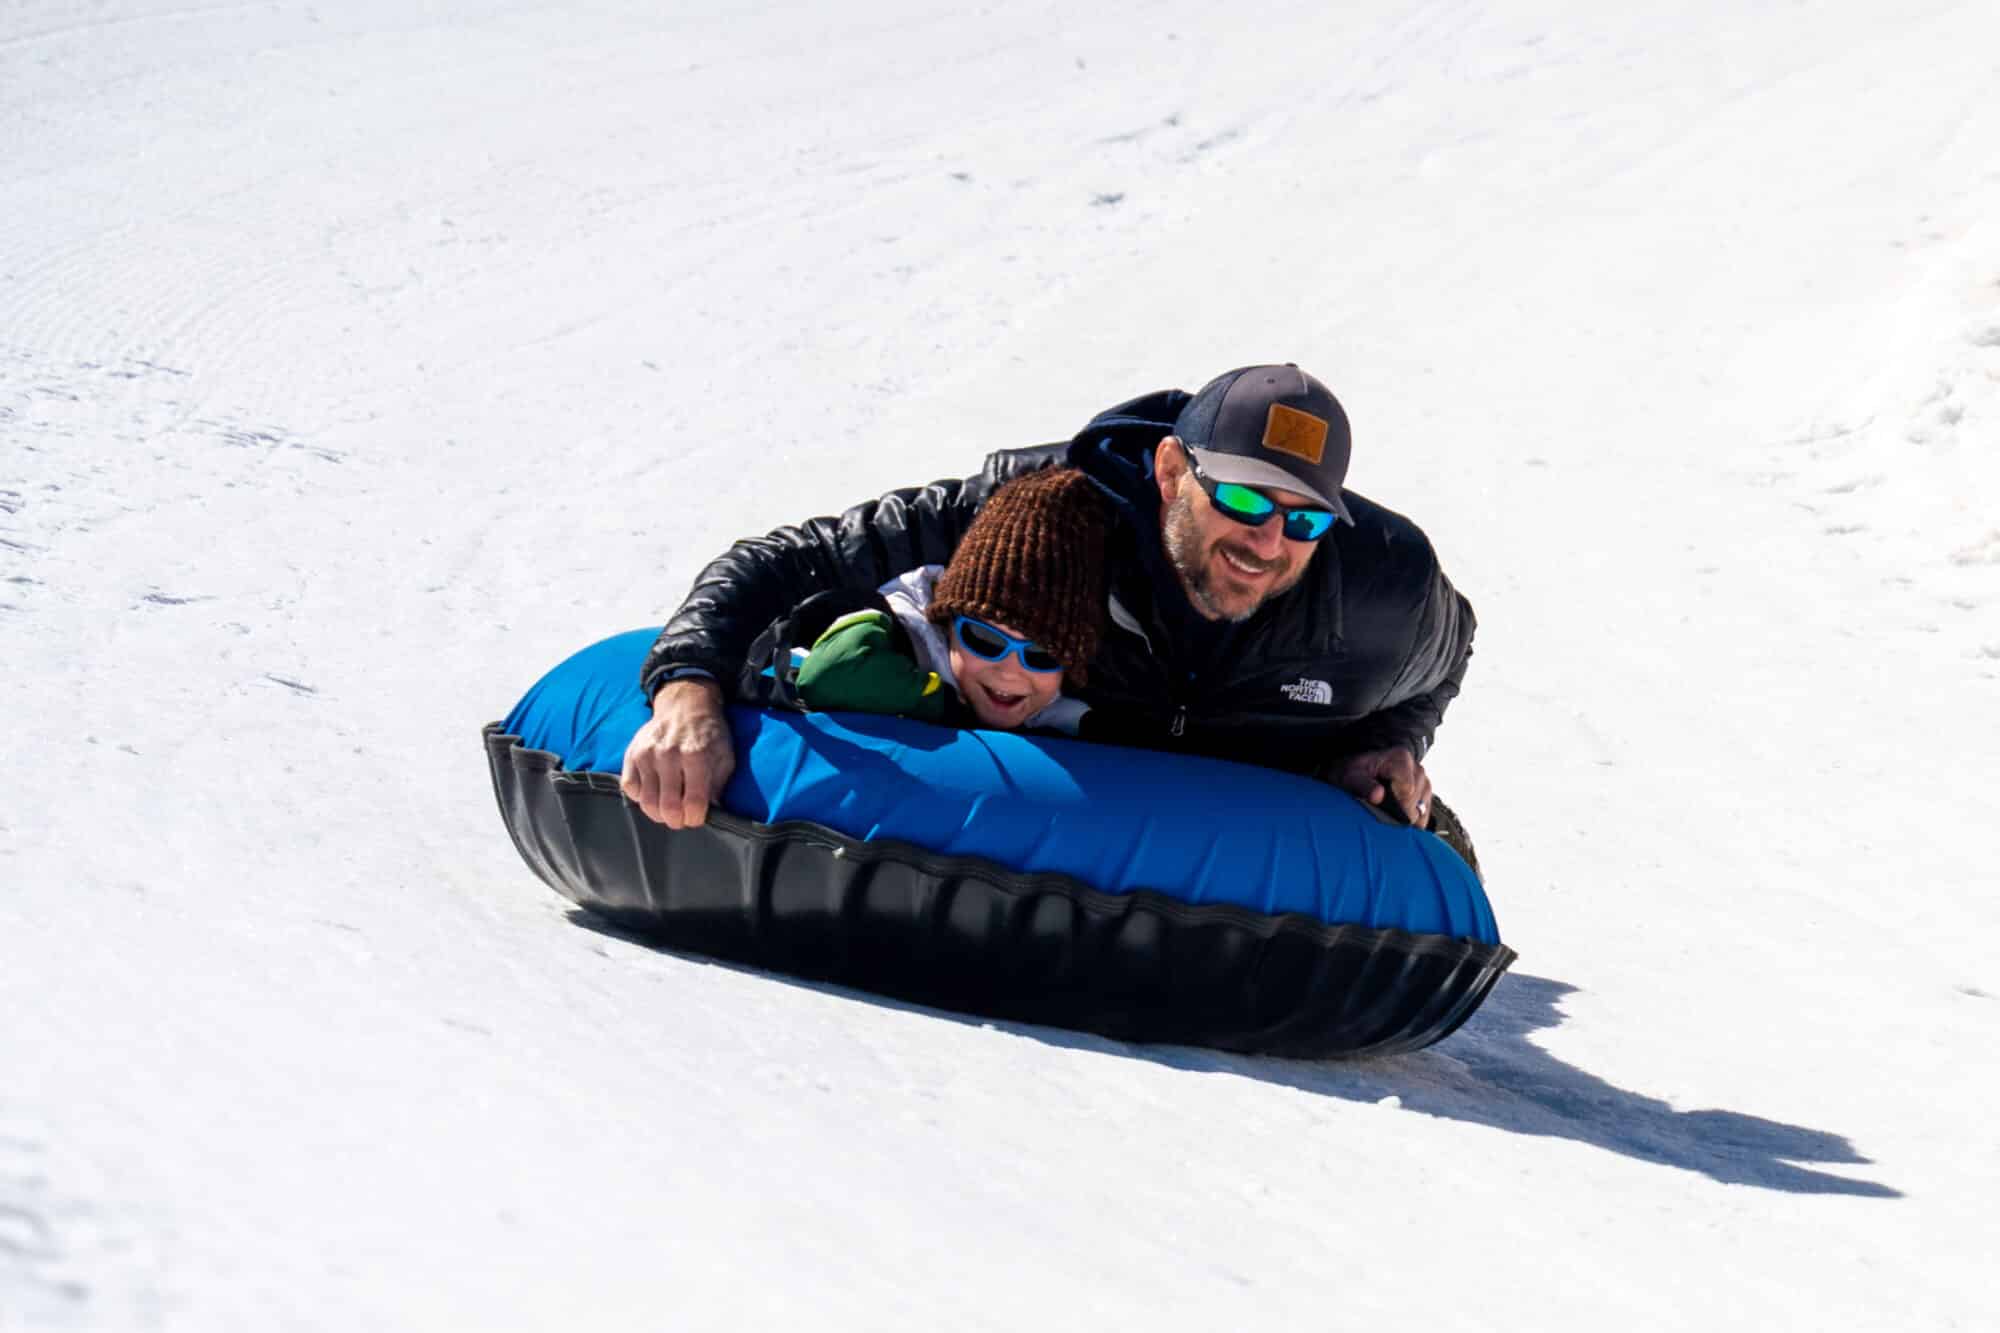 Father and son take on the banked turn at the tubing hill